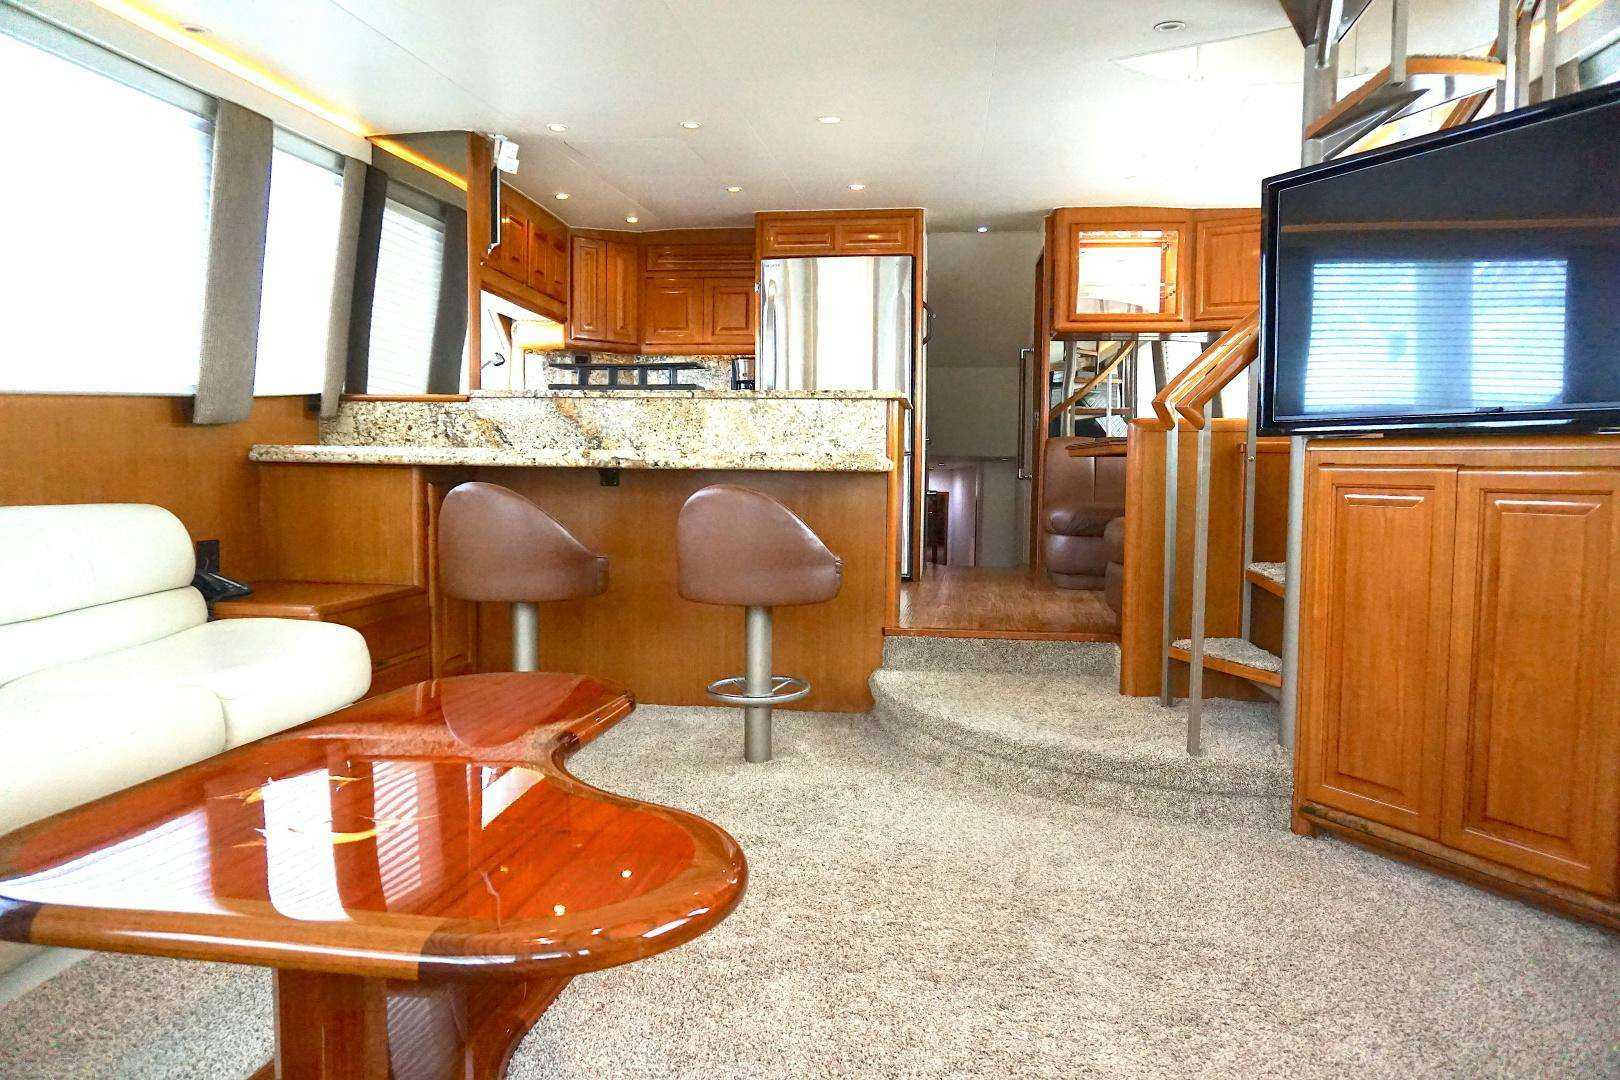 Crown royal
Yacht for Sale